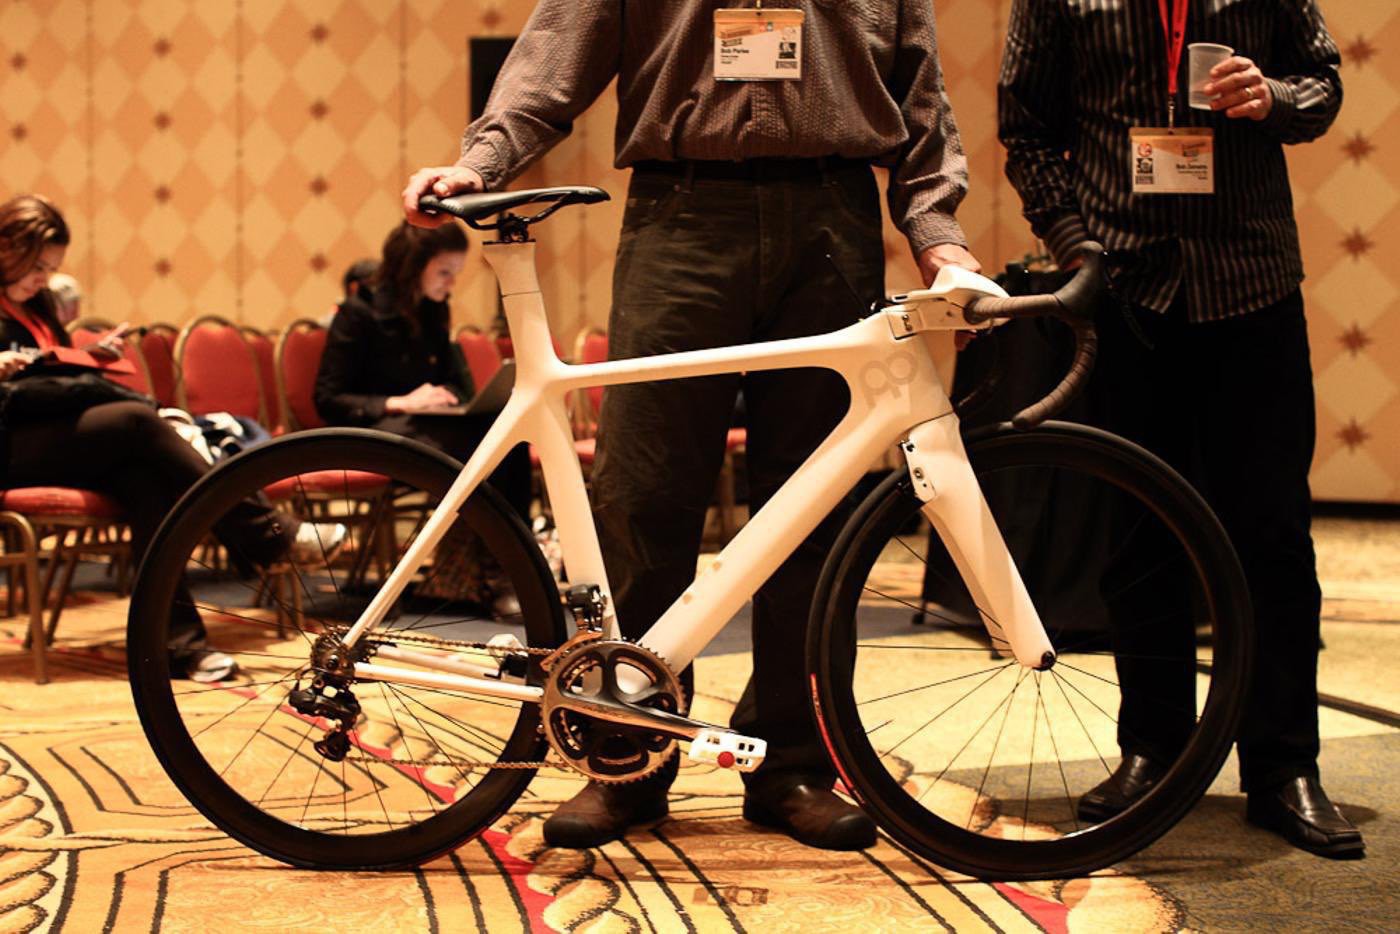 Parleee Cycles Toyota Prius Project bike shown at SXSW 201X via John Prolly / The Radivist